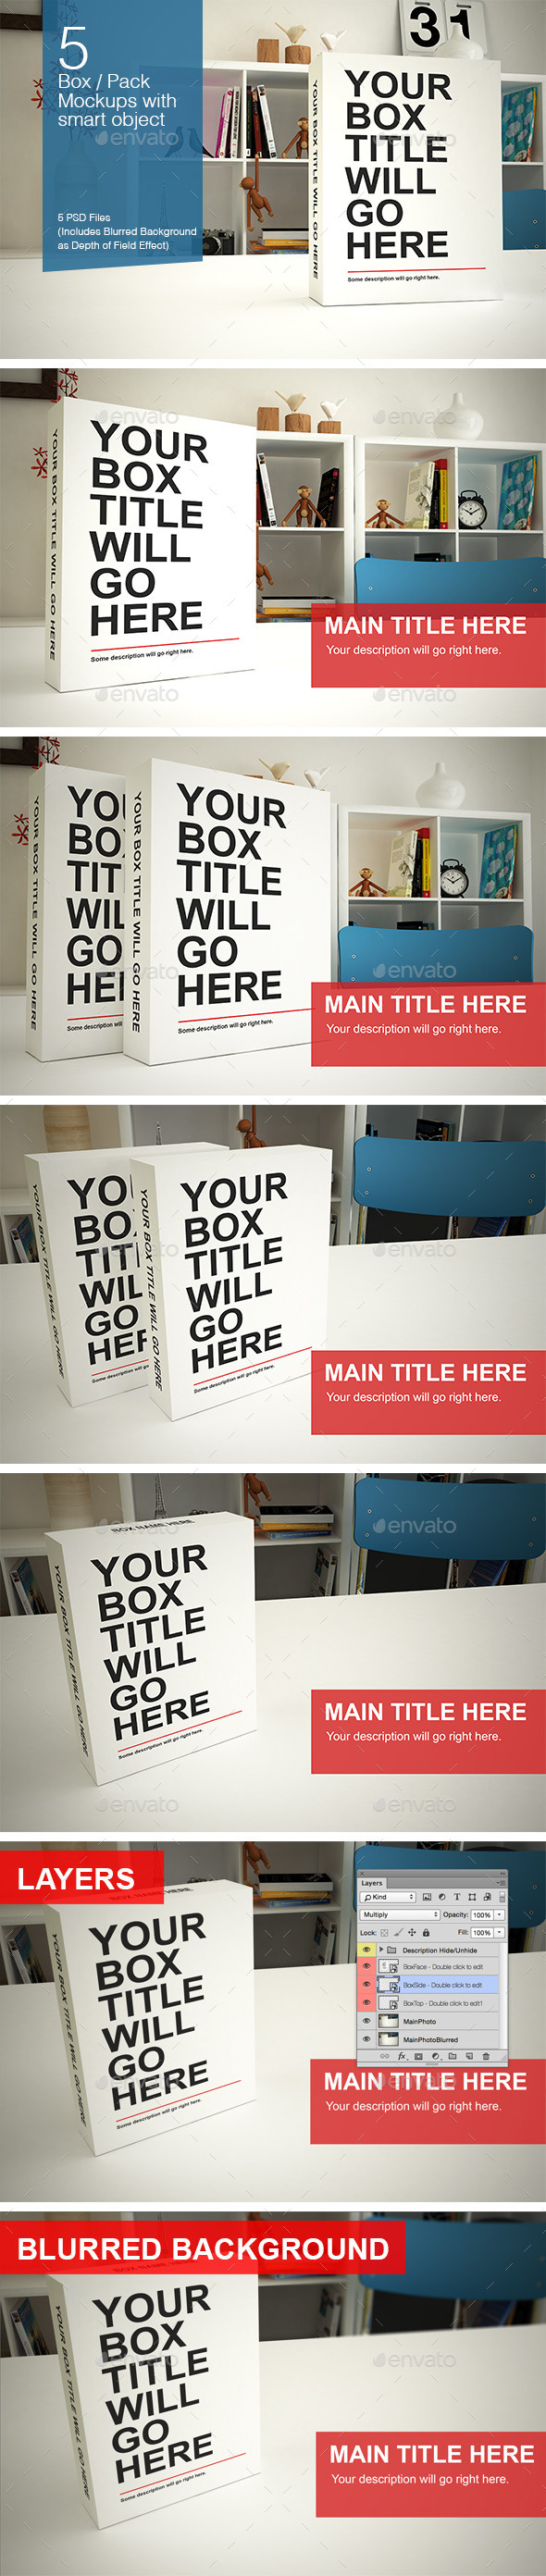 Download Box / Pack Mockups by smartybundles | GraphicRiver